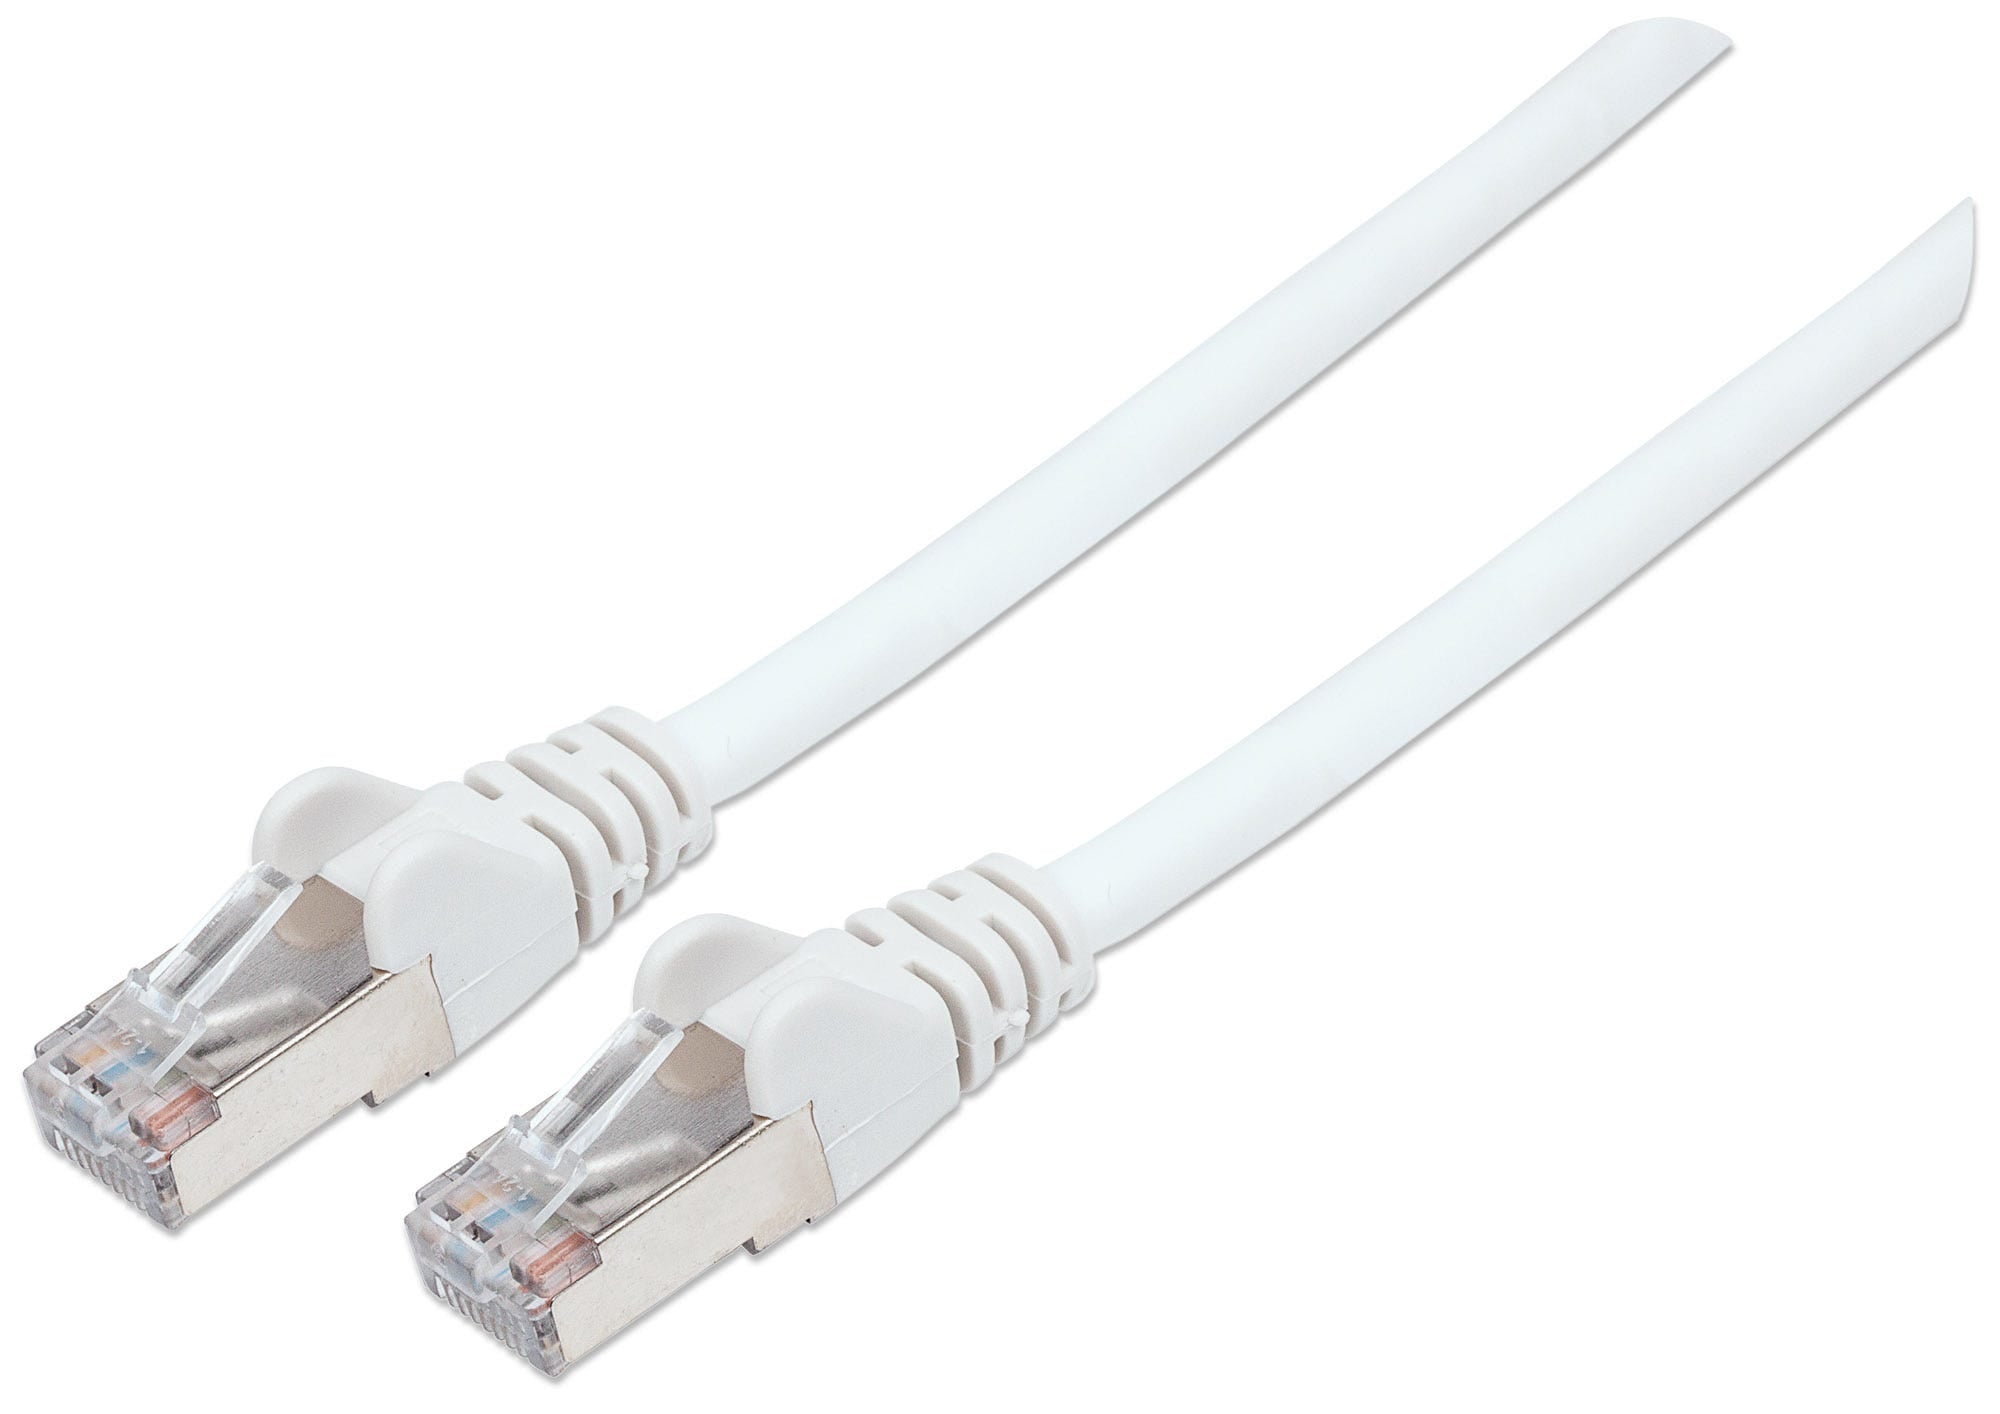 Intellinet Network Patch Cable, Cat6, 20m, White, Copper, S/FTP, LSOH / LSZH, PVC, RJ45, Gold Plated Contacts, Snagless, Booted, Lifetime Warranty, Polybag